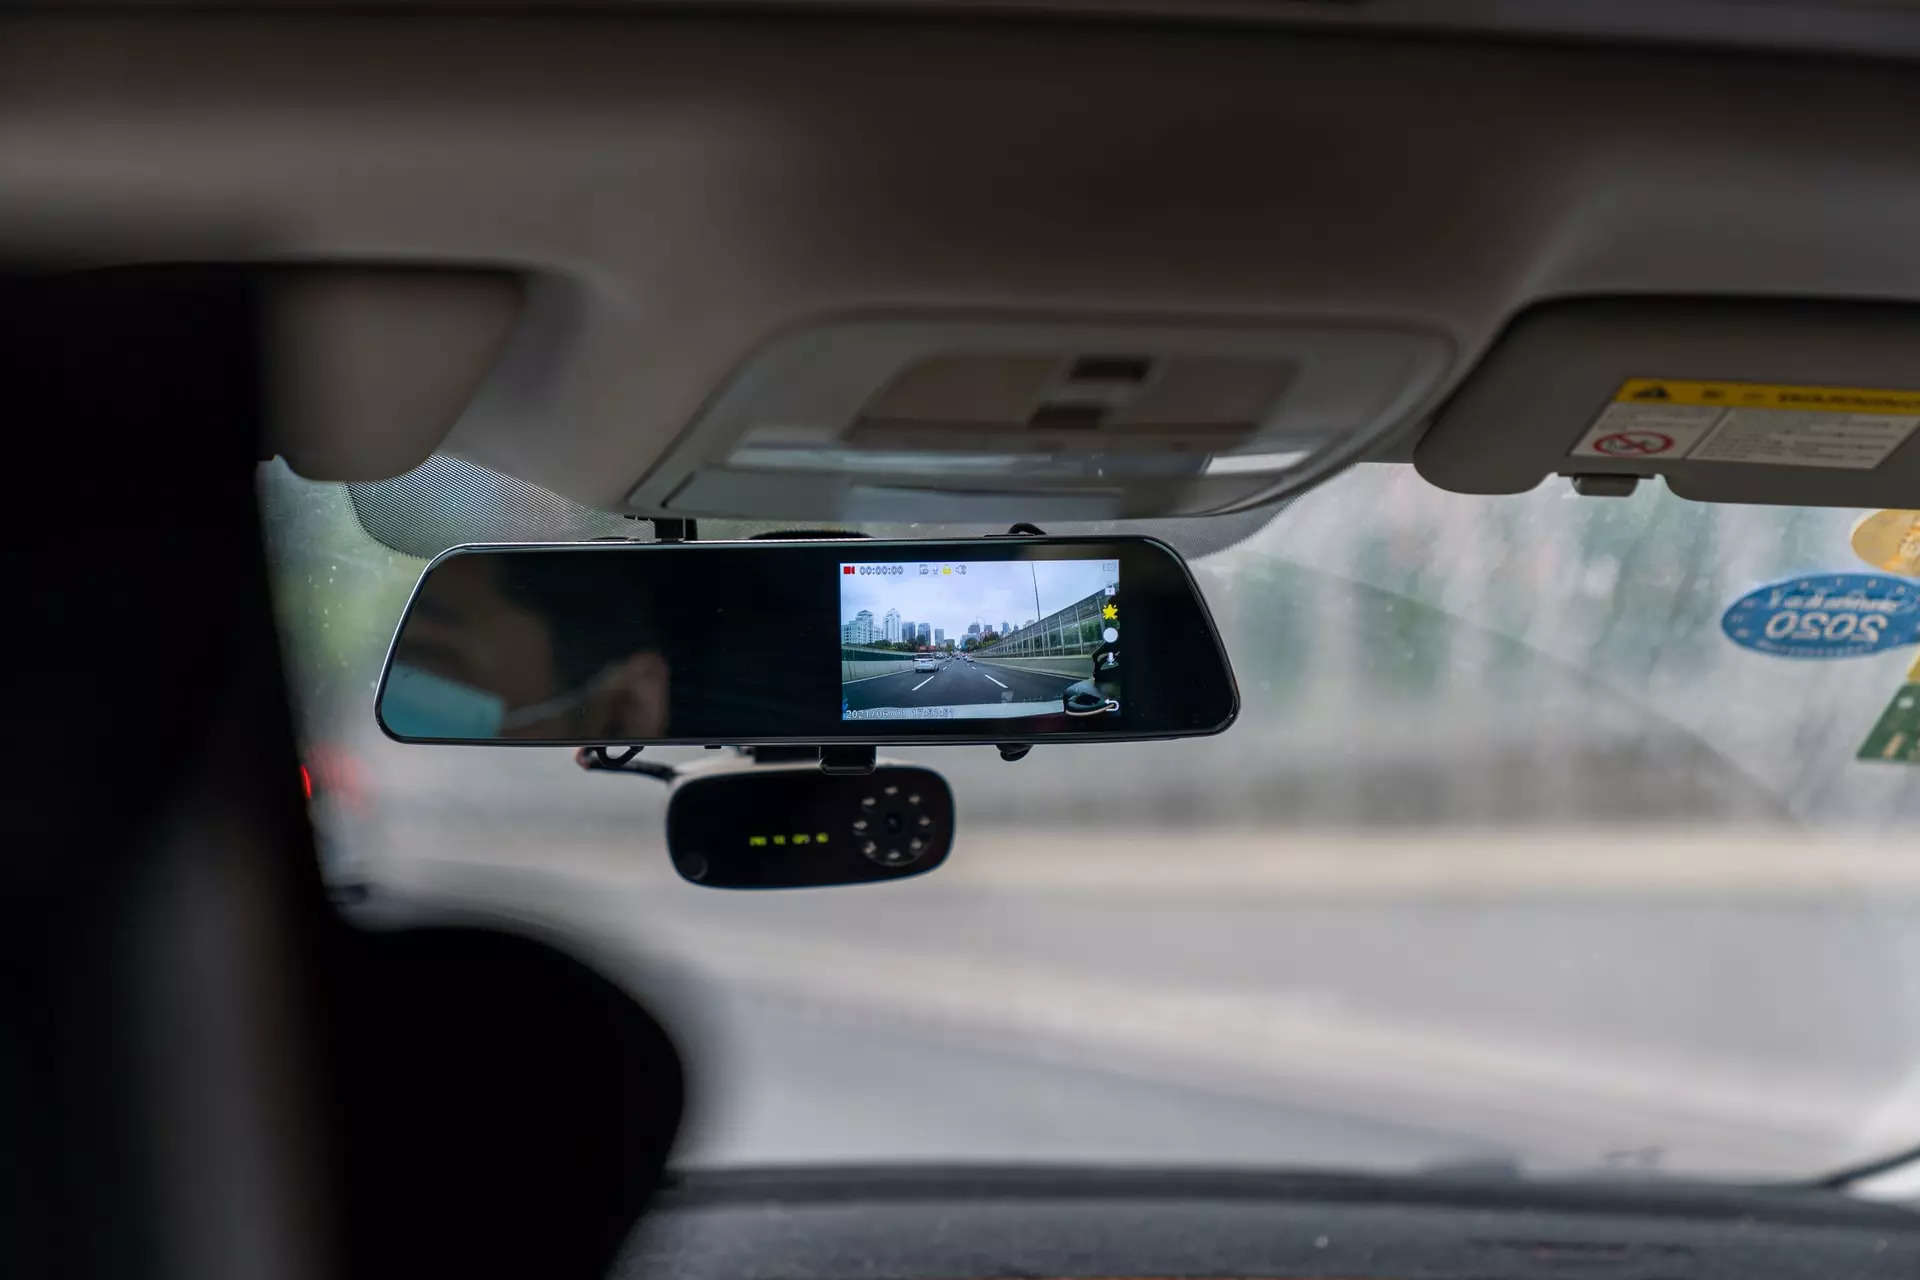 Best dashboard cameras with Wi-Fi support for cars